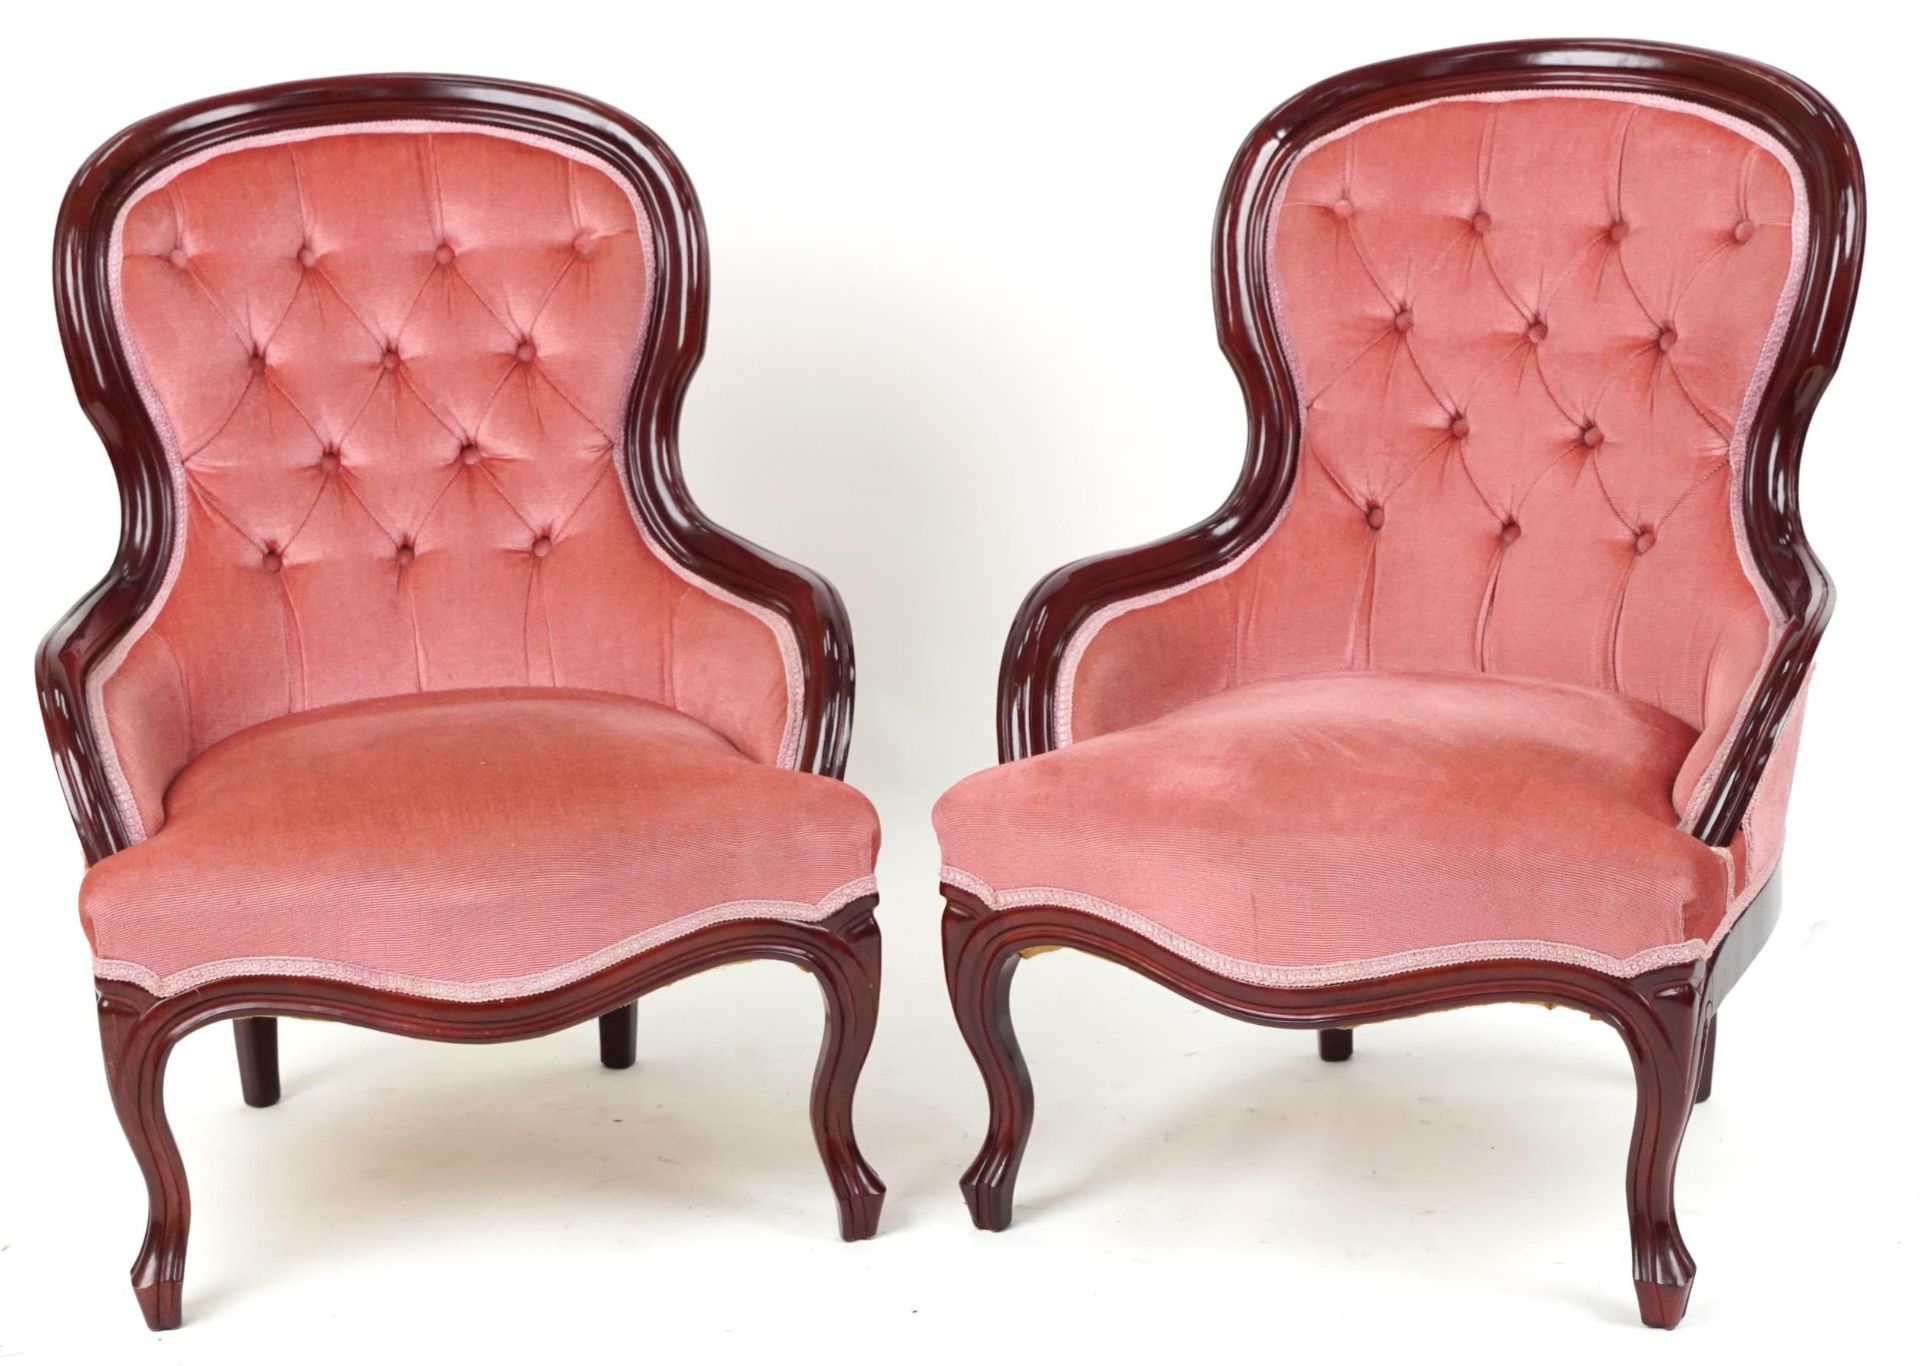 Pair of Victorian style mahogany bedroom chairs with salmon button back upholstery, each 82cm high